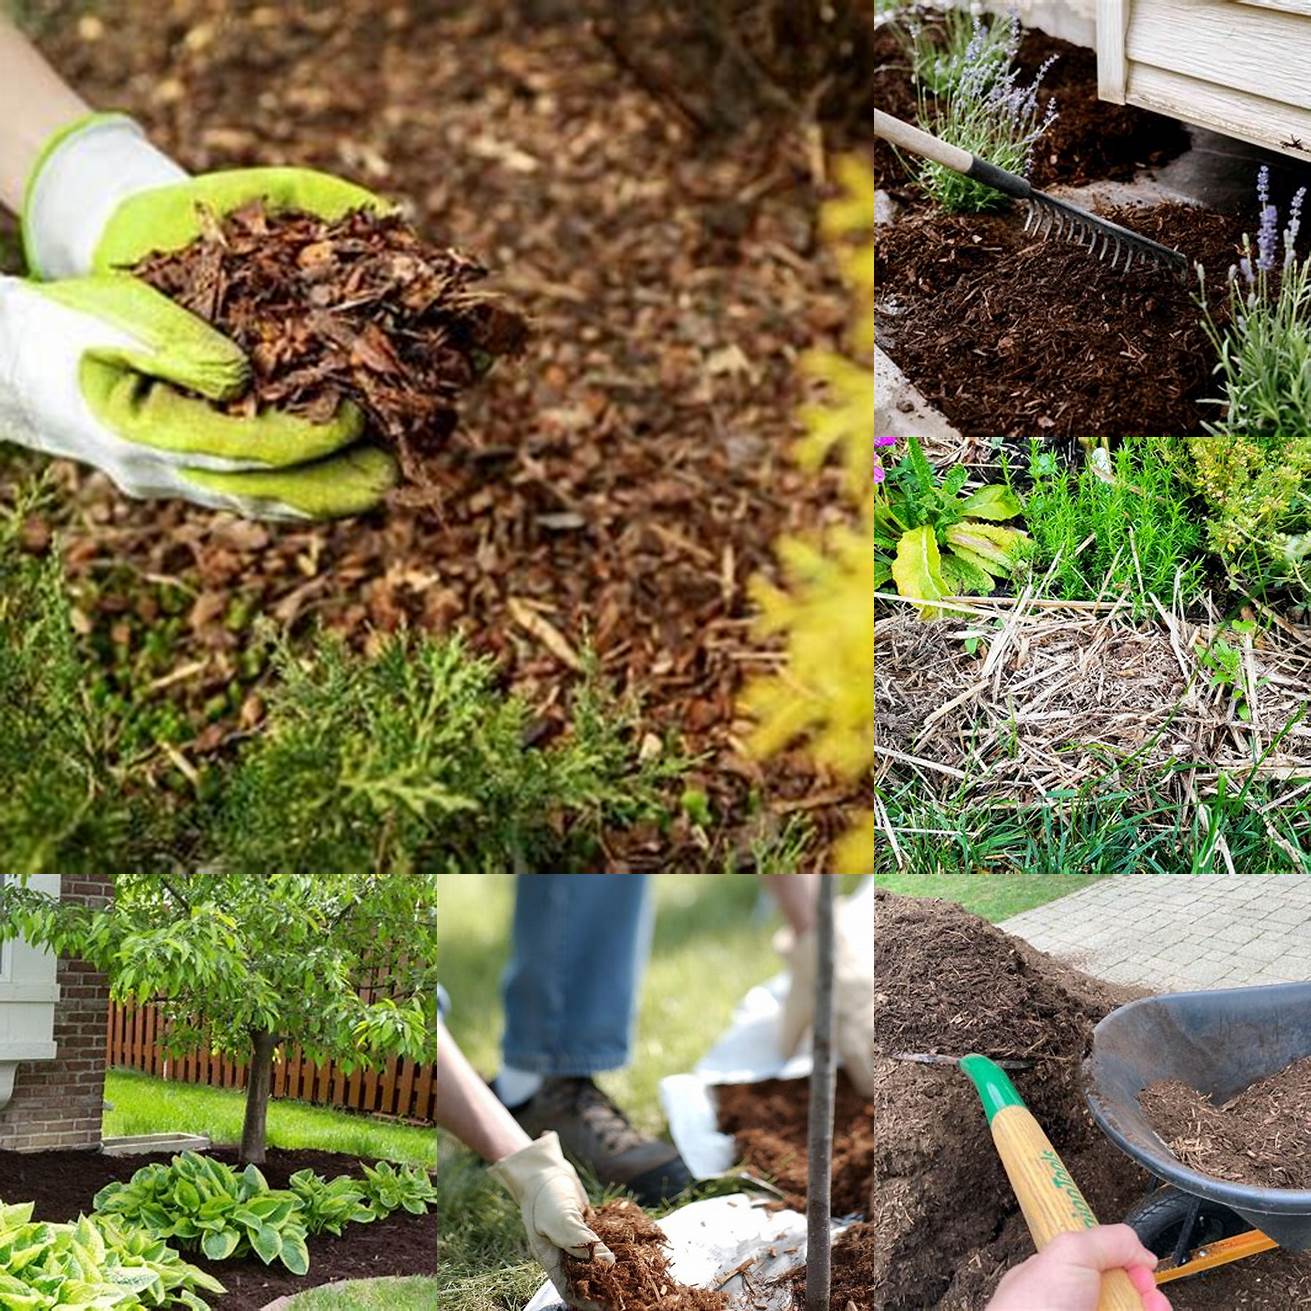 Apply Mulch Mulch can help retain moisture and prevent weed growth